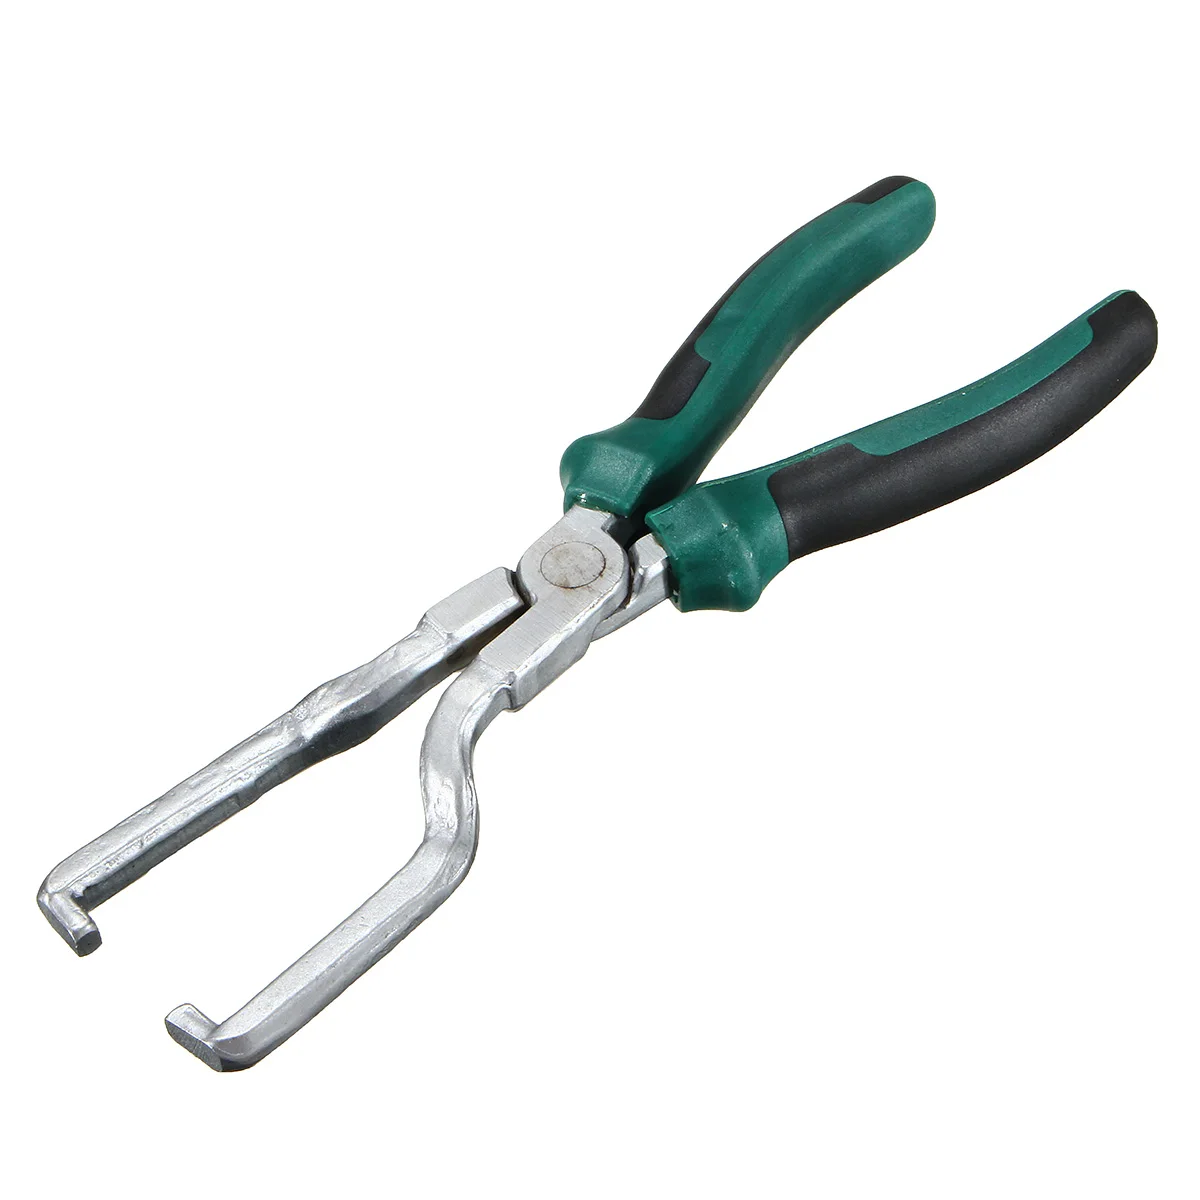 GJ0938 FUEL FILTER LINE CLIP PETROL HOSE PIPE DISCONNECT RELEASE REMOVAL PLIERS 